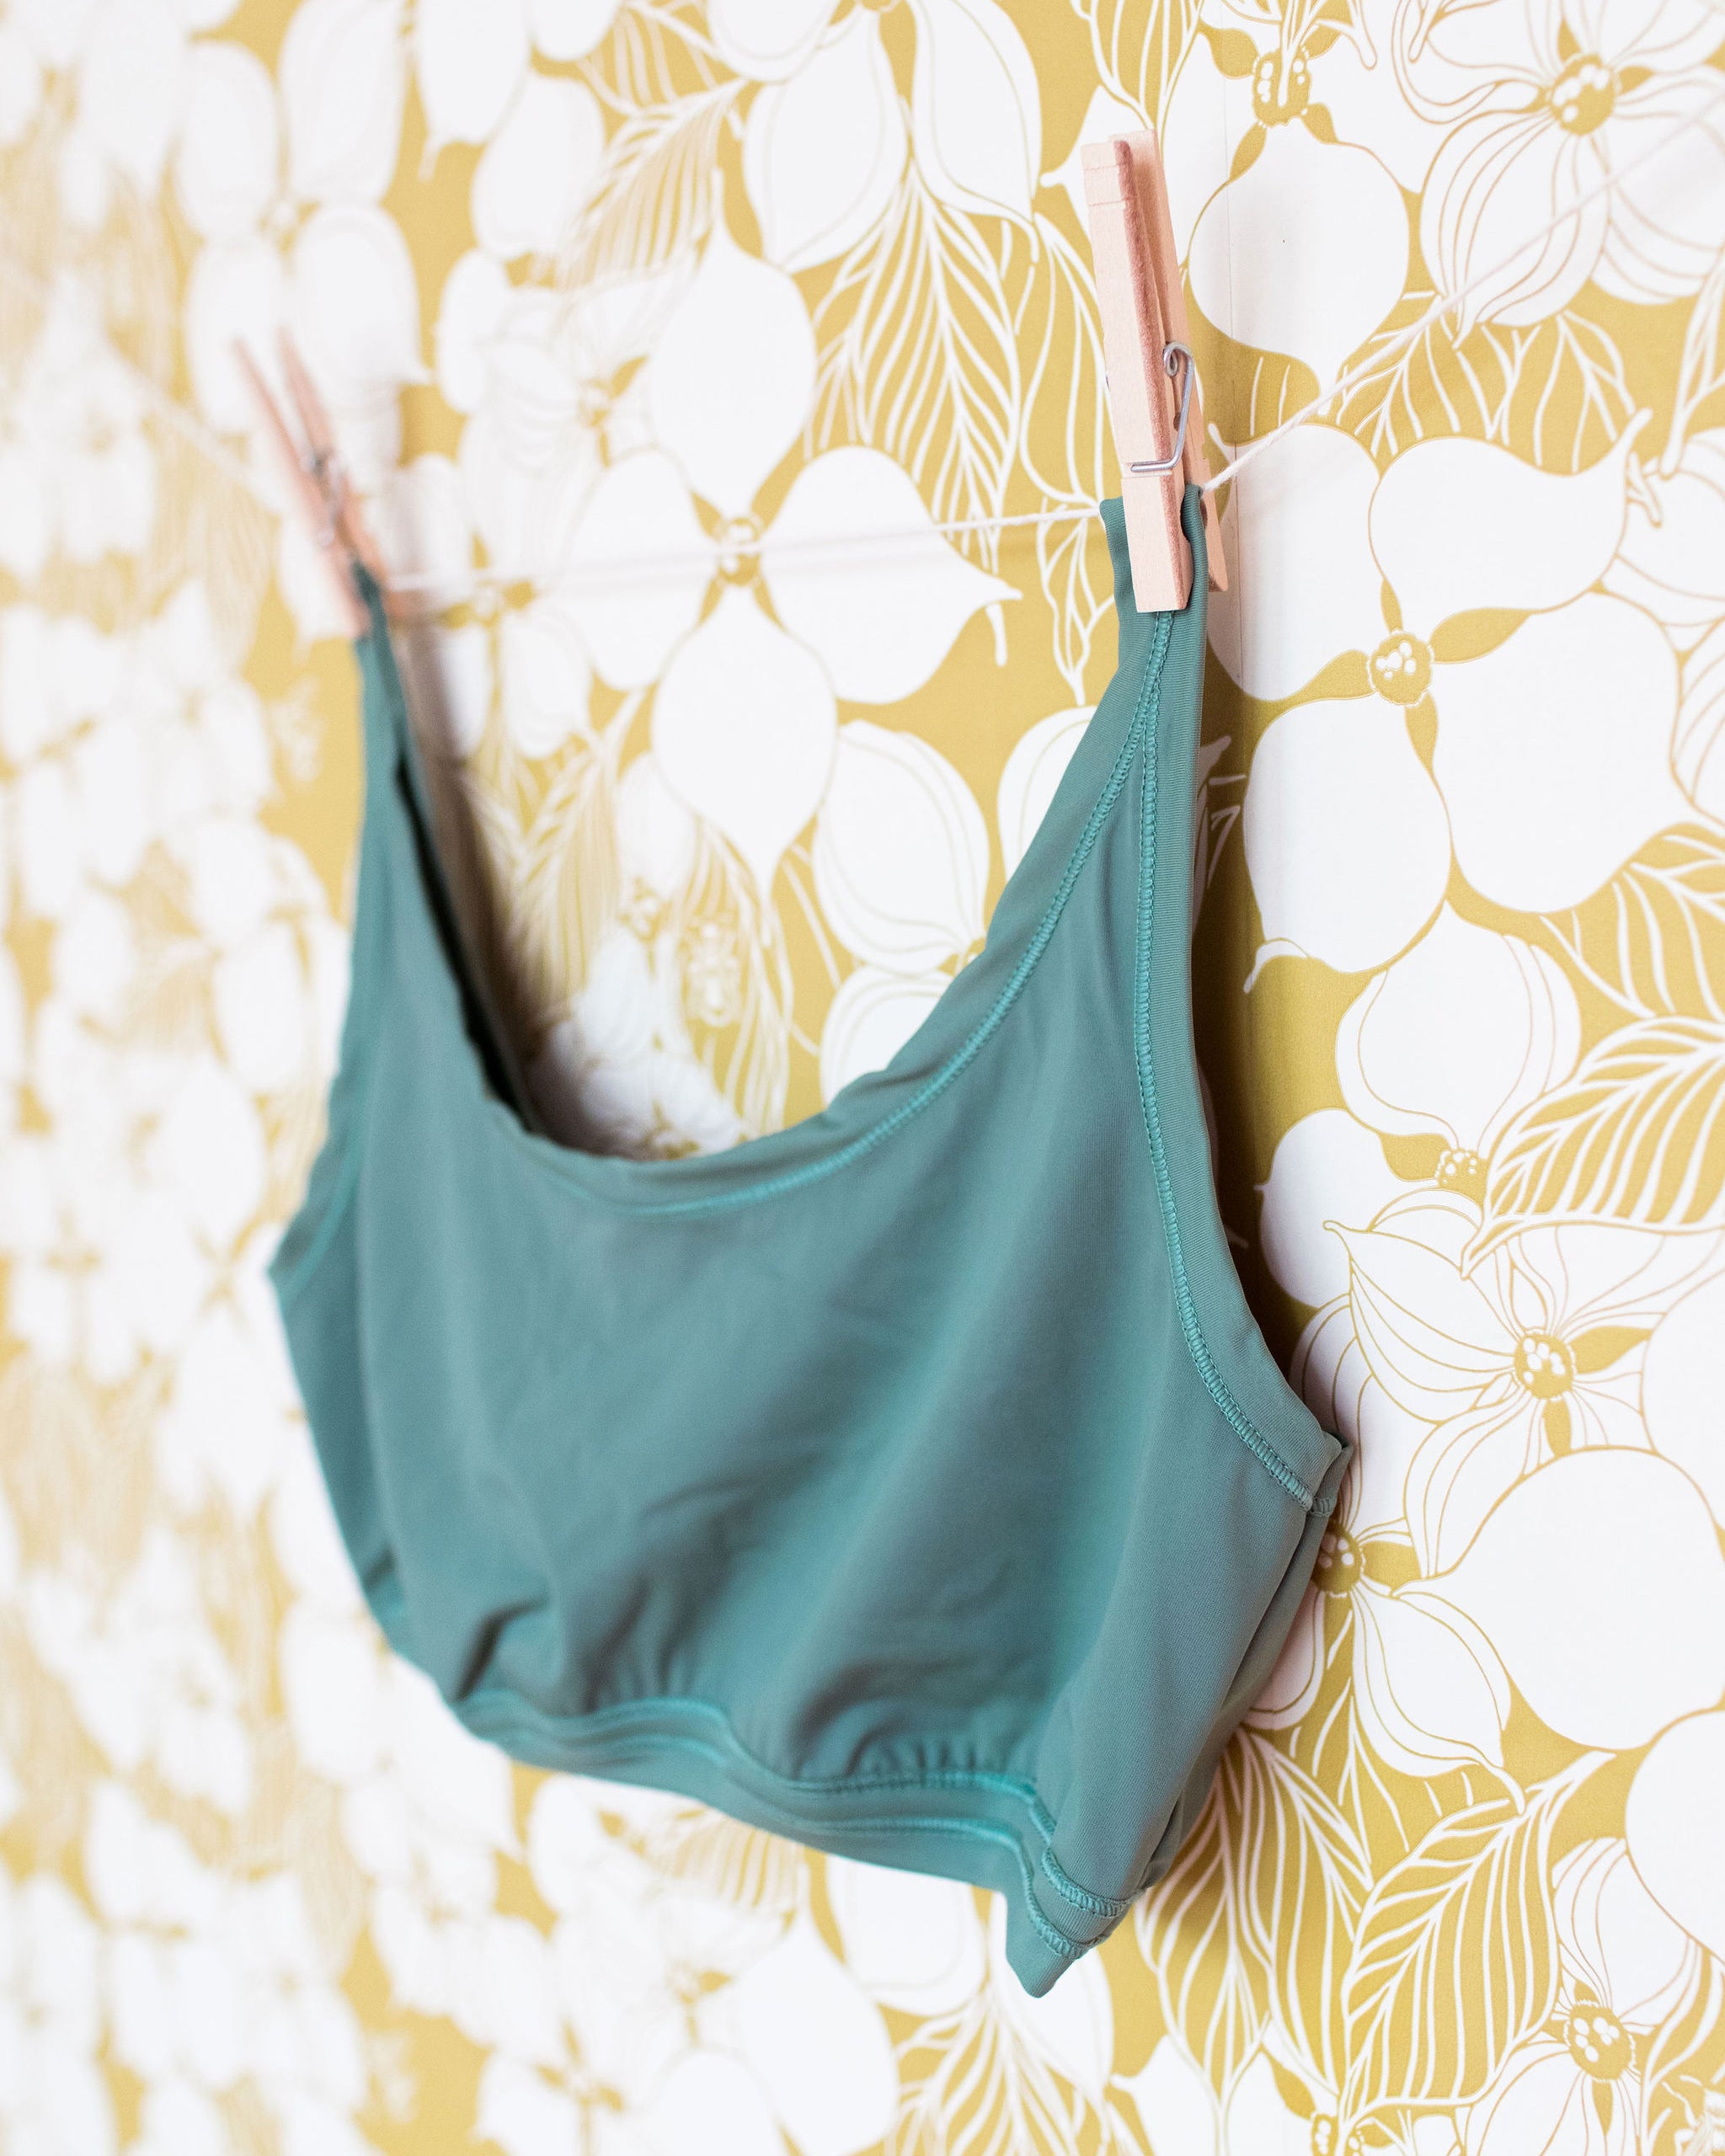 Close up of Swimwear Top in Lichen Green hanging with clothes pins on a floral wall.